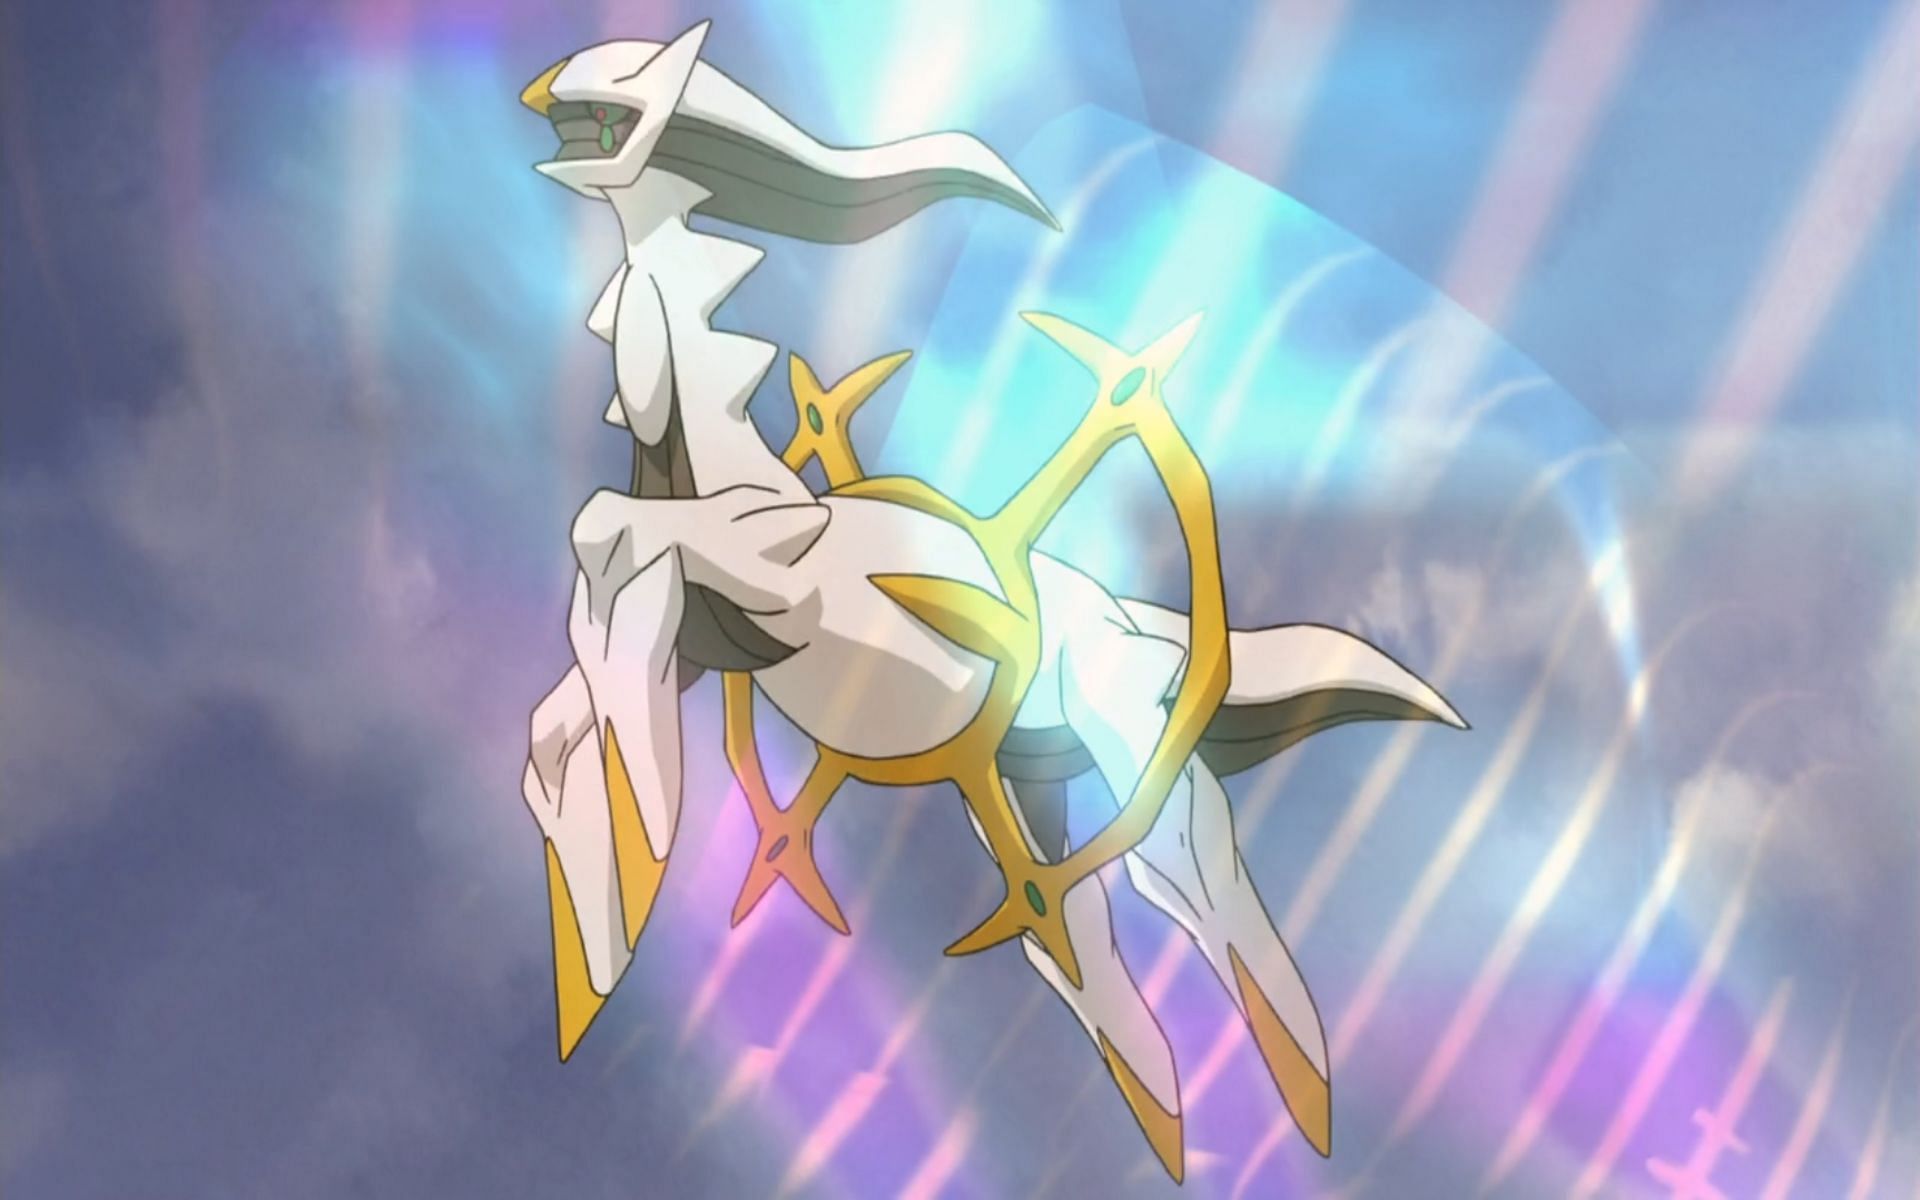 Being a mythical Pokemon, Arceus can only be caught during an event (Image via The Pokemon Company)